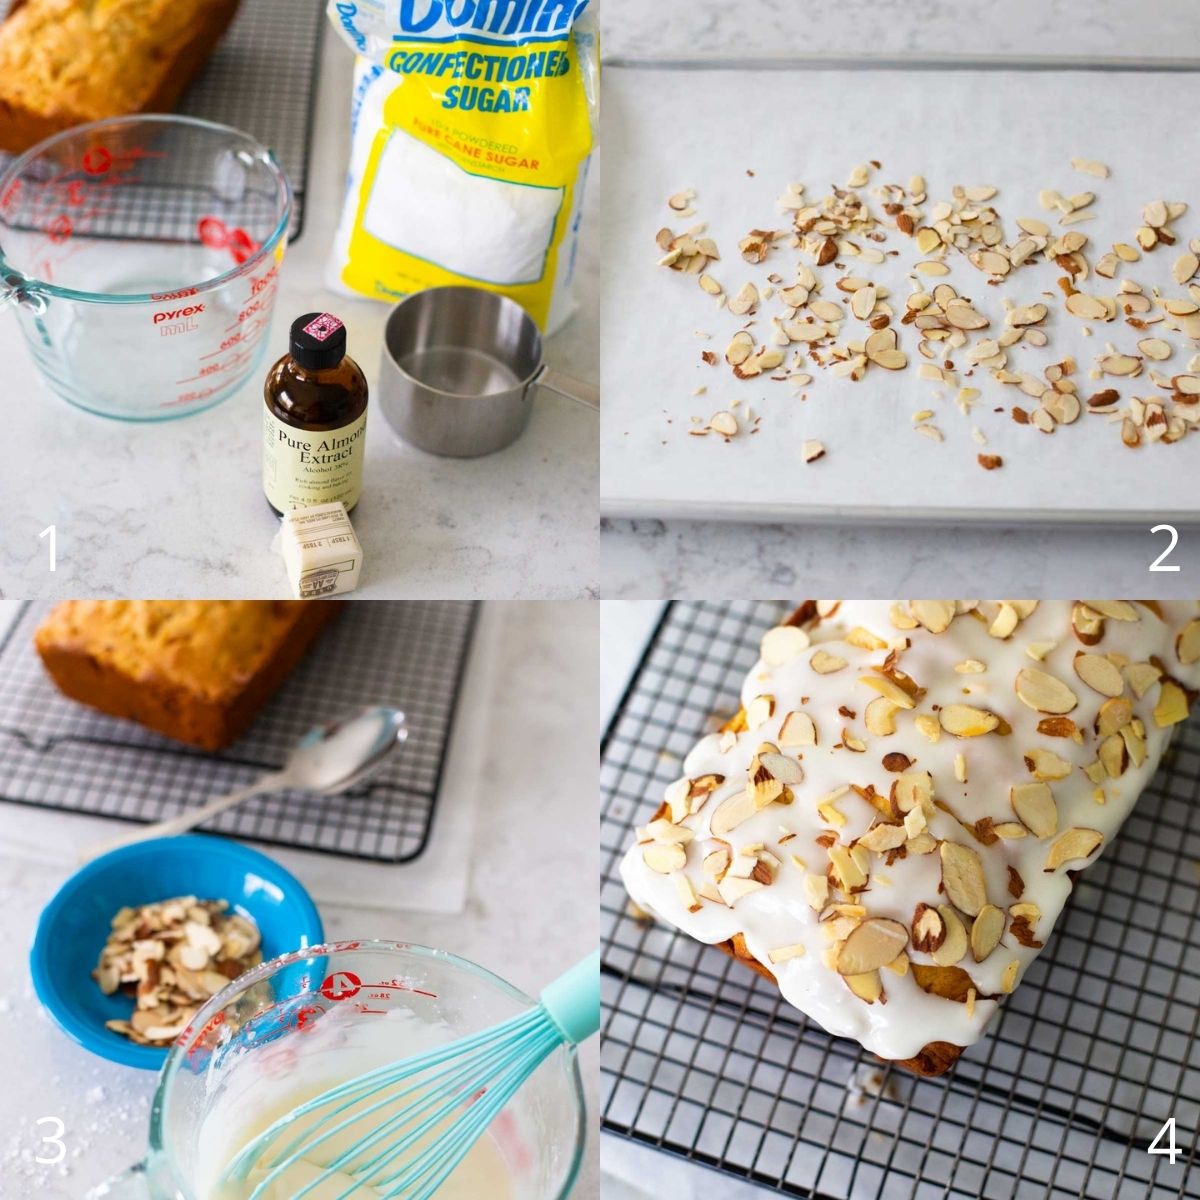 Step by step photos show how to make the almond glaze for the bread and toast the sliced almonds.